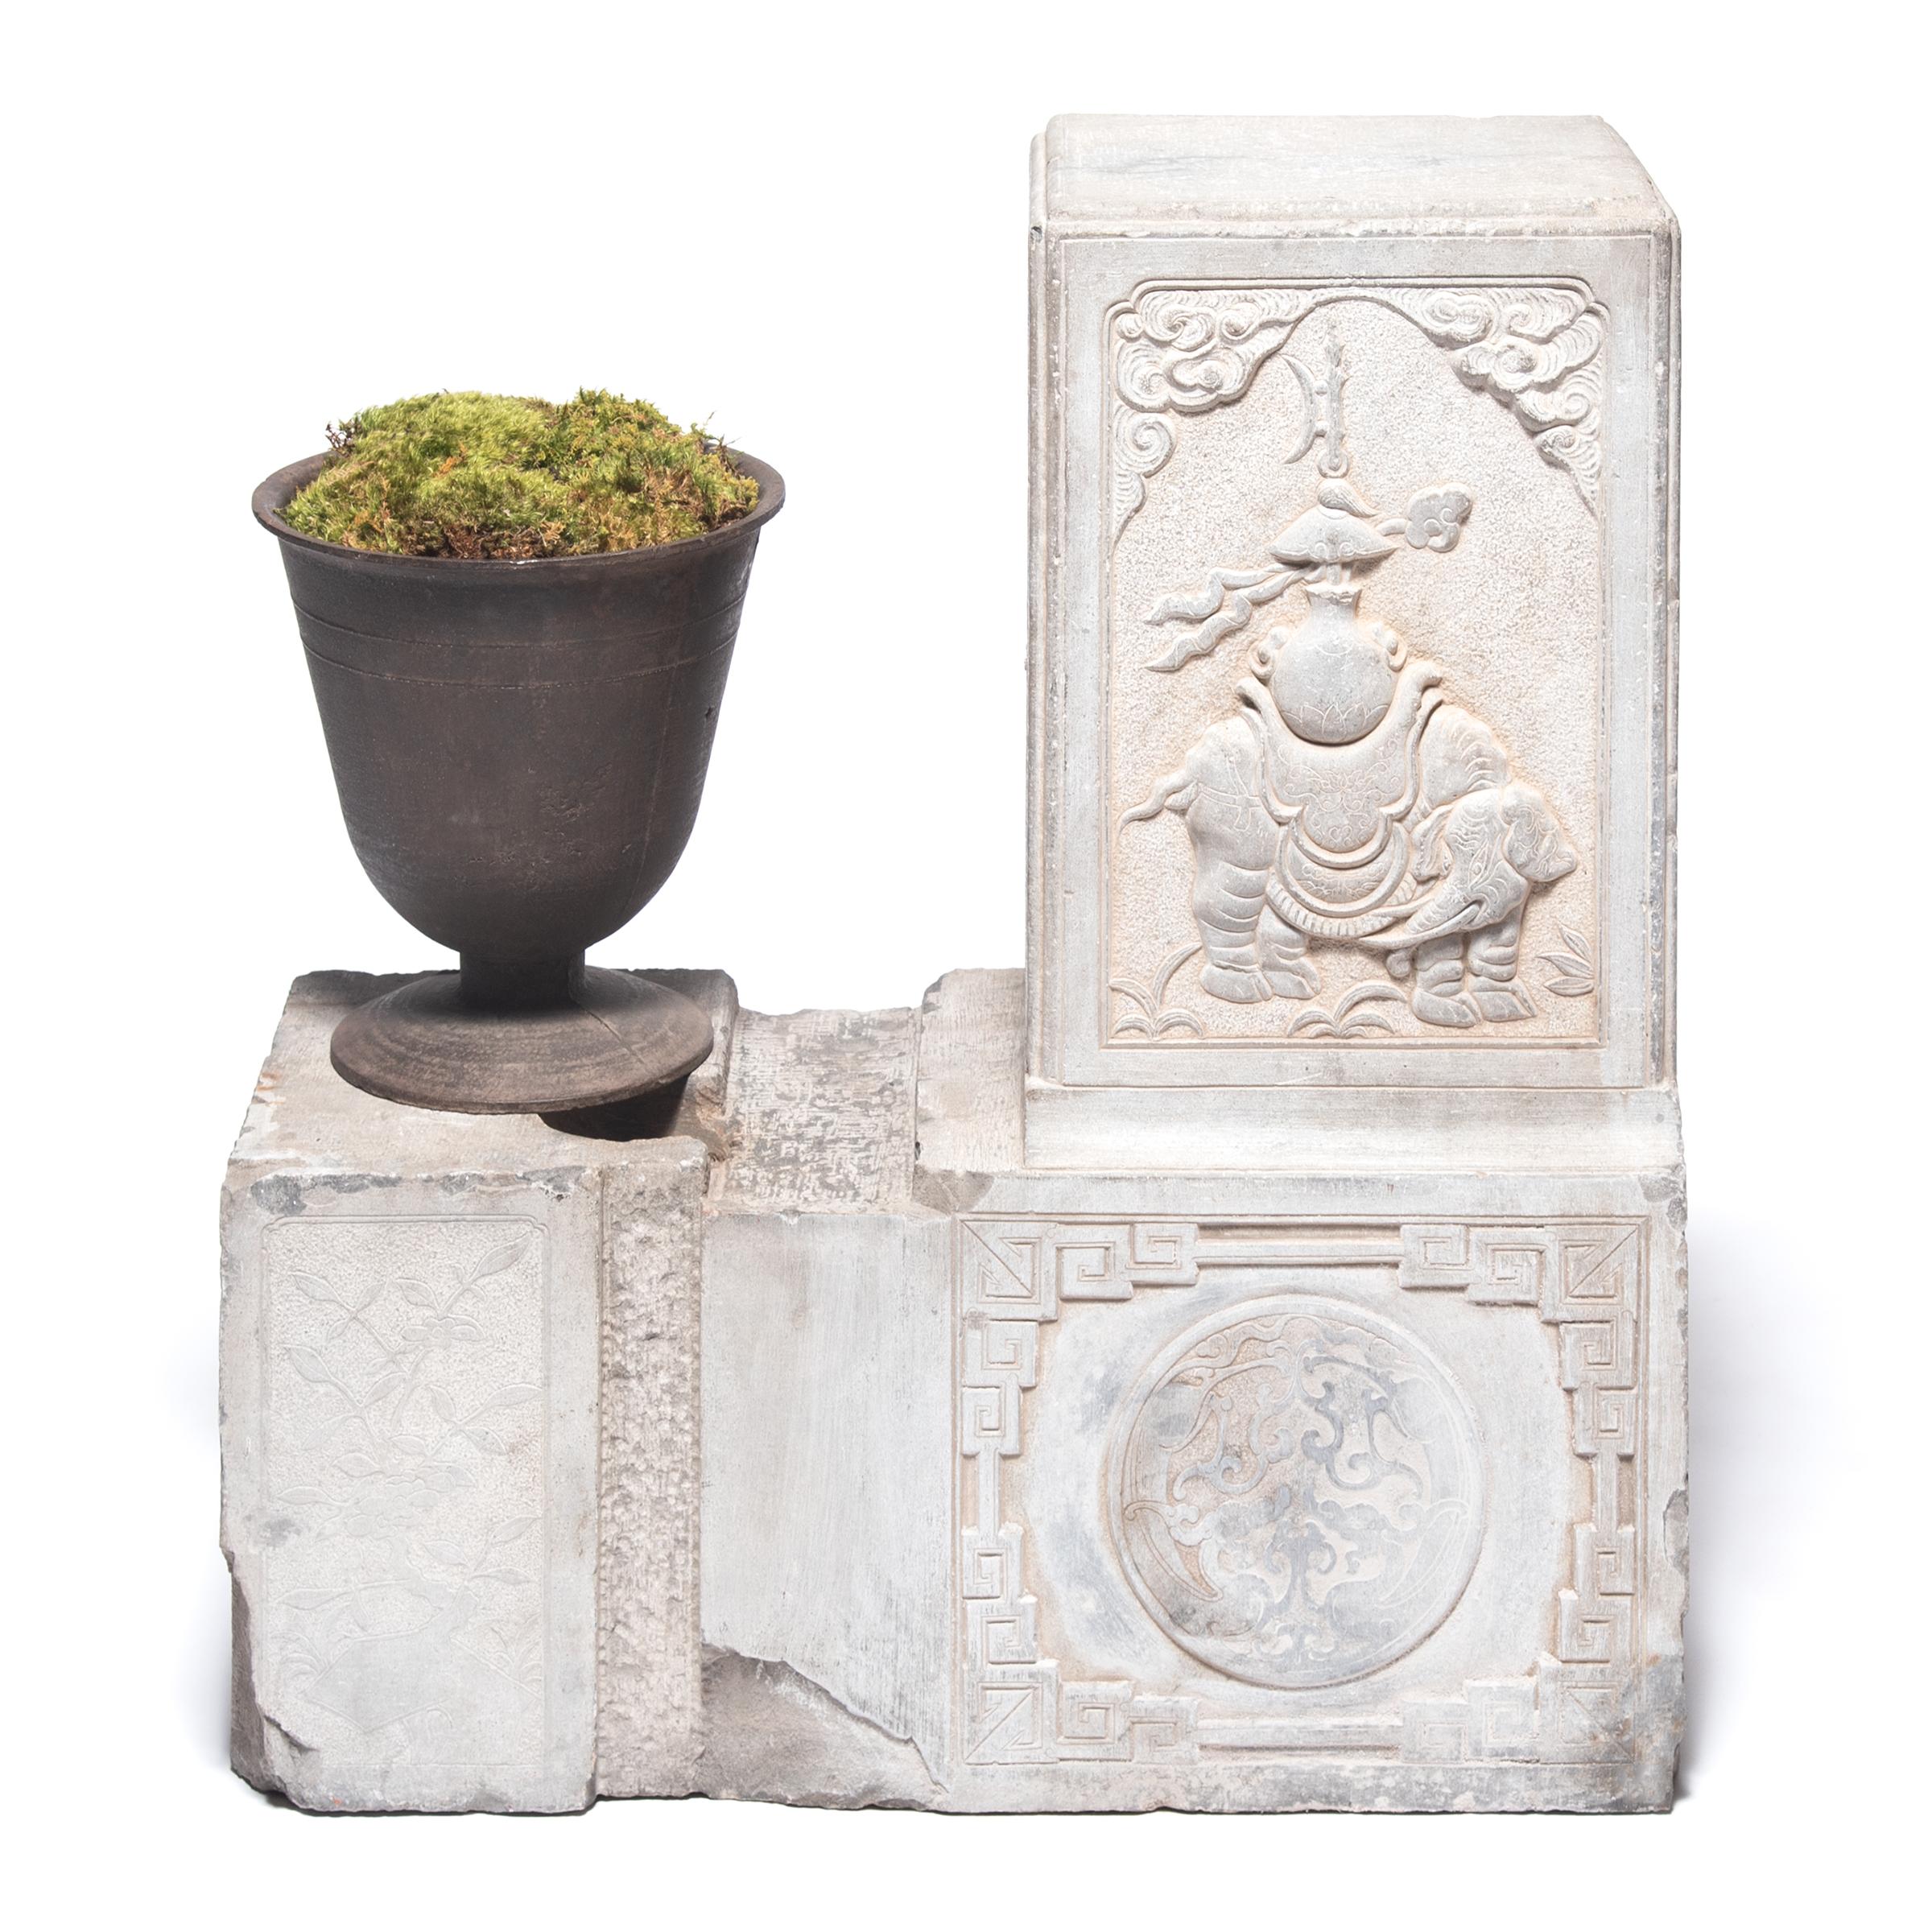 Pair of Chinese Stone Door Posts with Mythical Elephants, c. 1850 For Sale 7